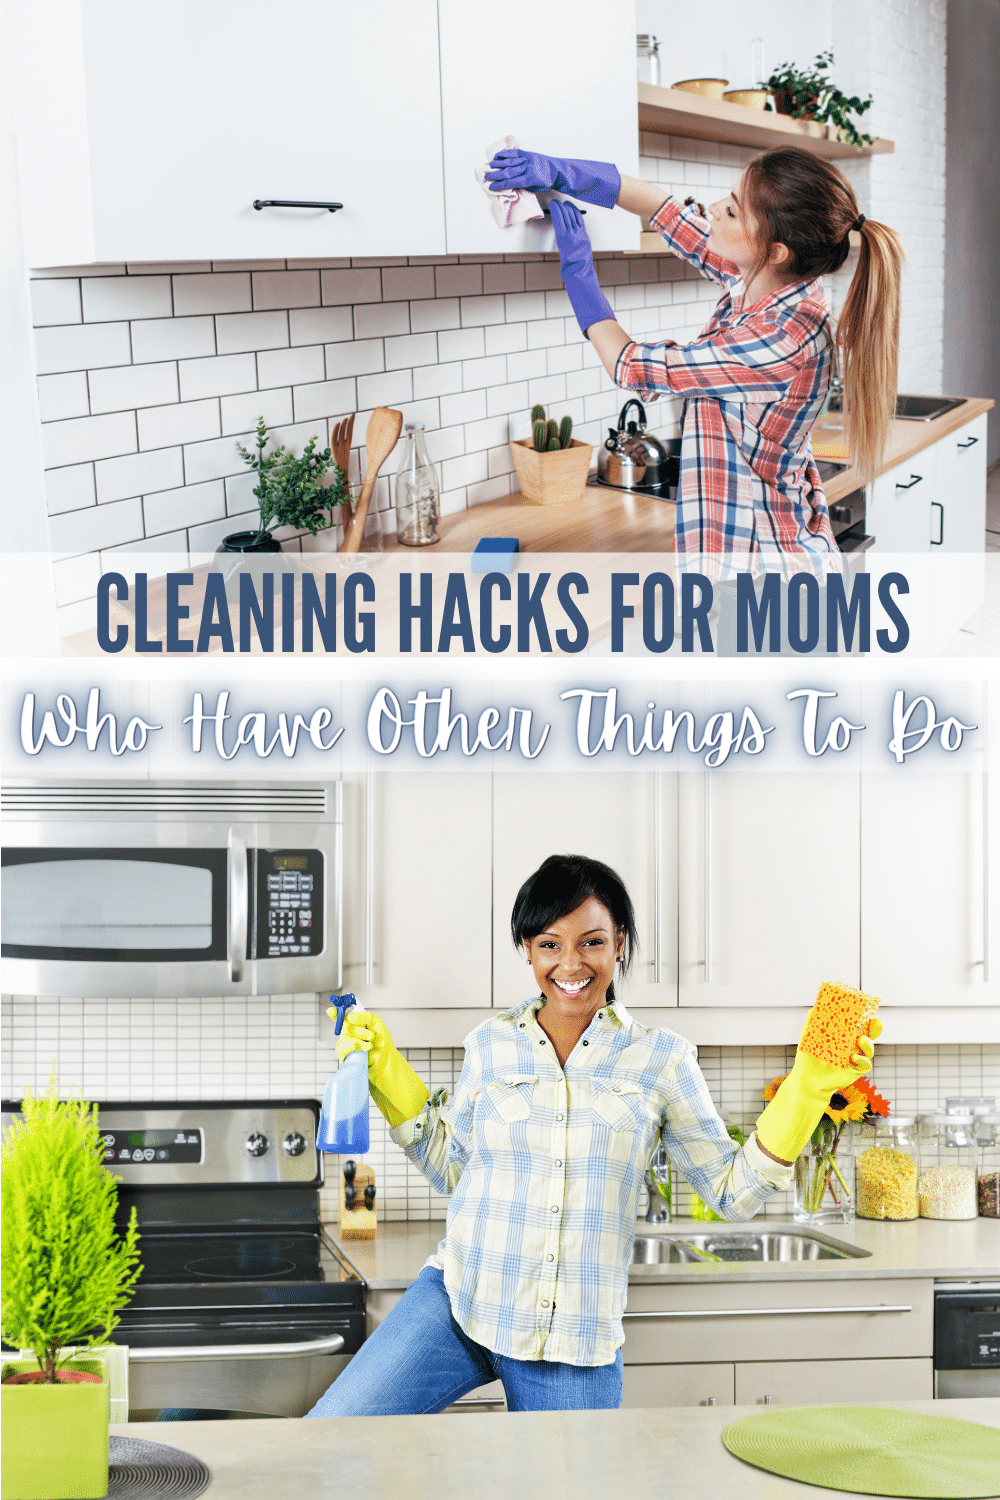 Cleaning hacks for moms that make some of the toughest, most dreaded cleaning tasks MUCH easier and using items that are already on hand. #cleaninghacks #cleaning #momlife #cleaningtips via @wondermomwannab